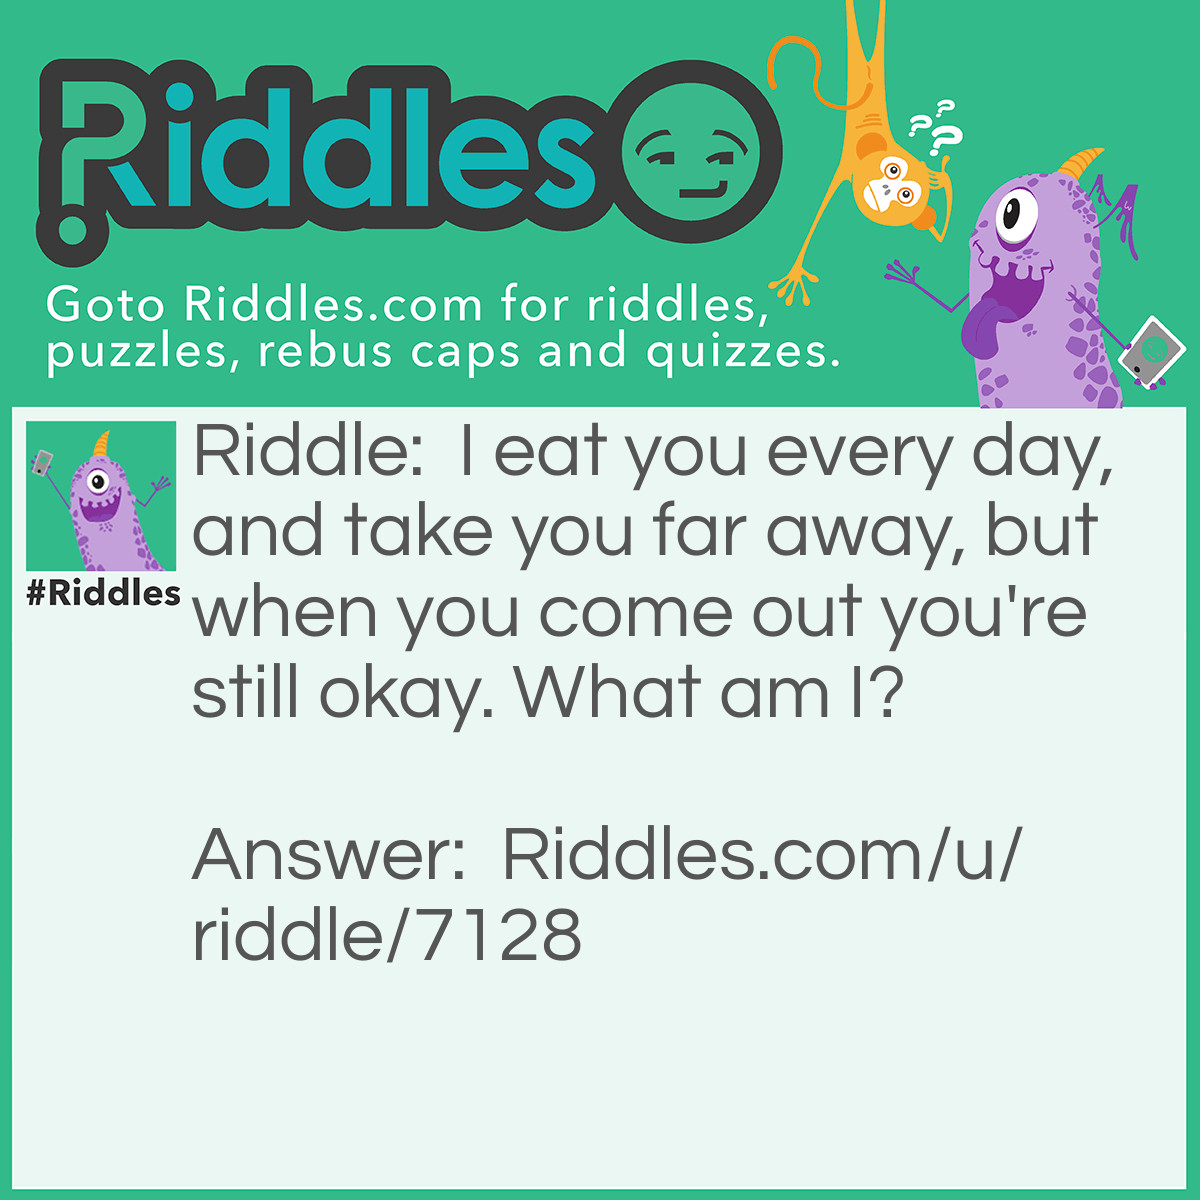 Riddle: I eat you every day, and take you far away, but when you come out you're still okay. What am I? Answer: A School bus.